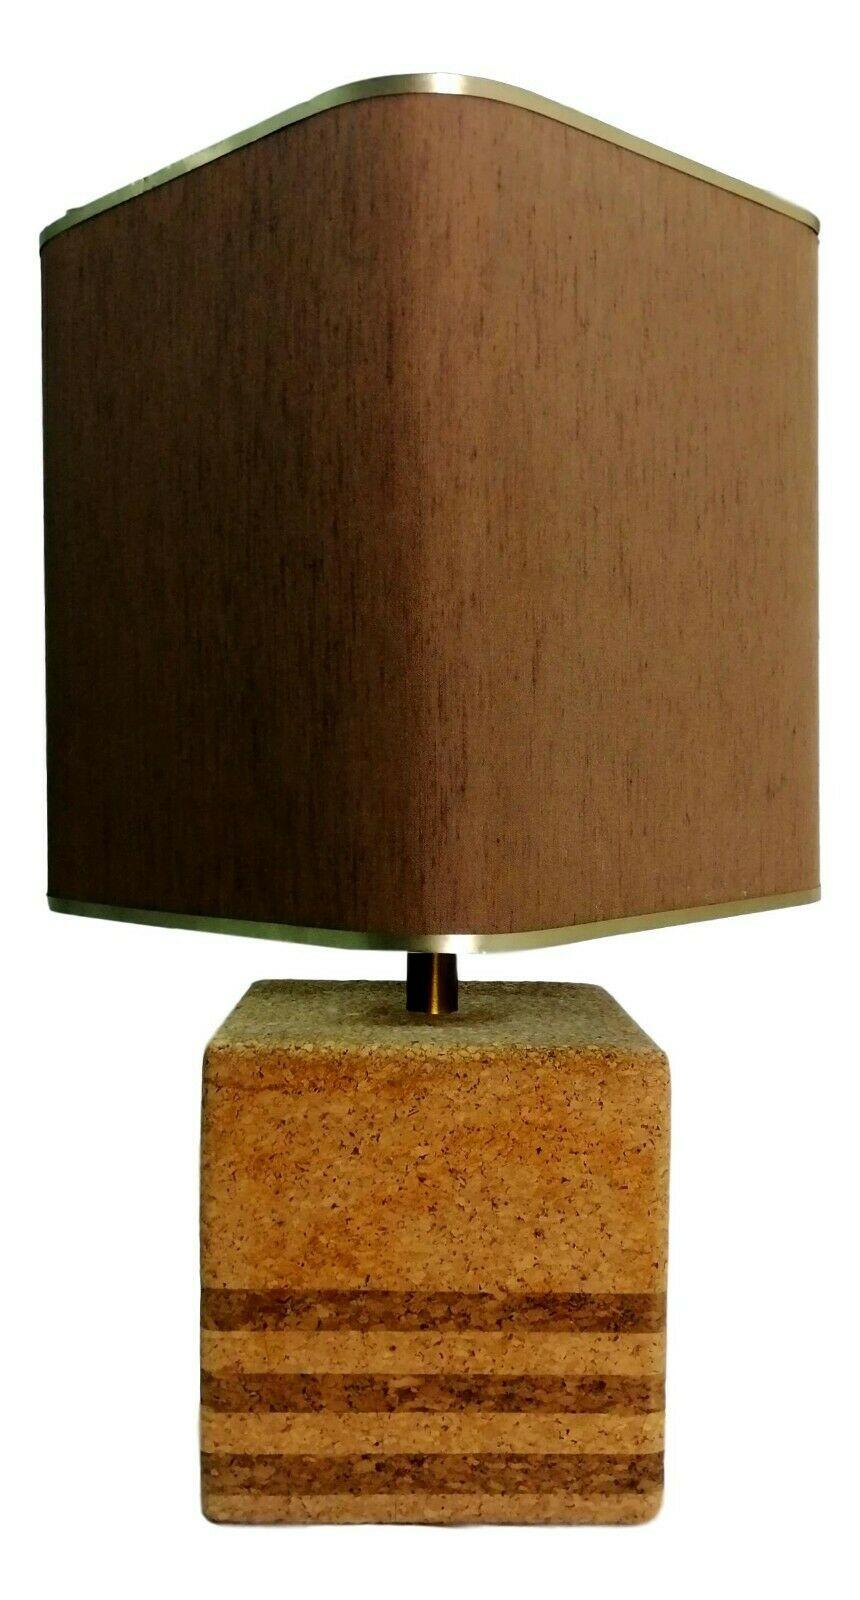 Splendid and elegant original table lamp from the 70s entirely made of two-tone cork

It measures a total of 70 cm in height, the base about 25 cm on each side

Very good condition, as shown in photos, cork and diffuser in excellent condition,